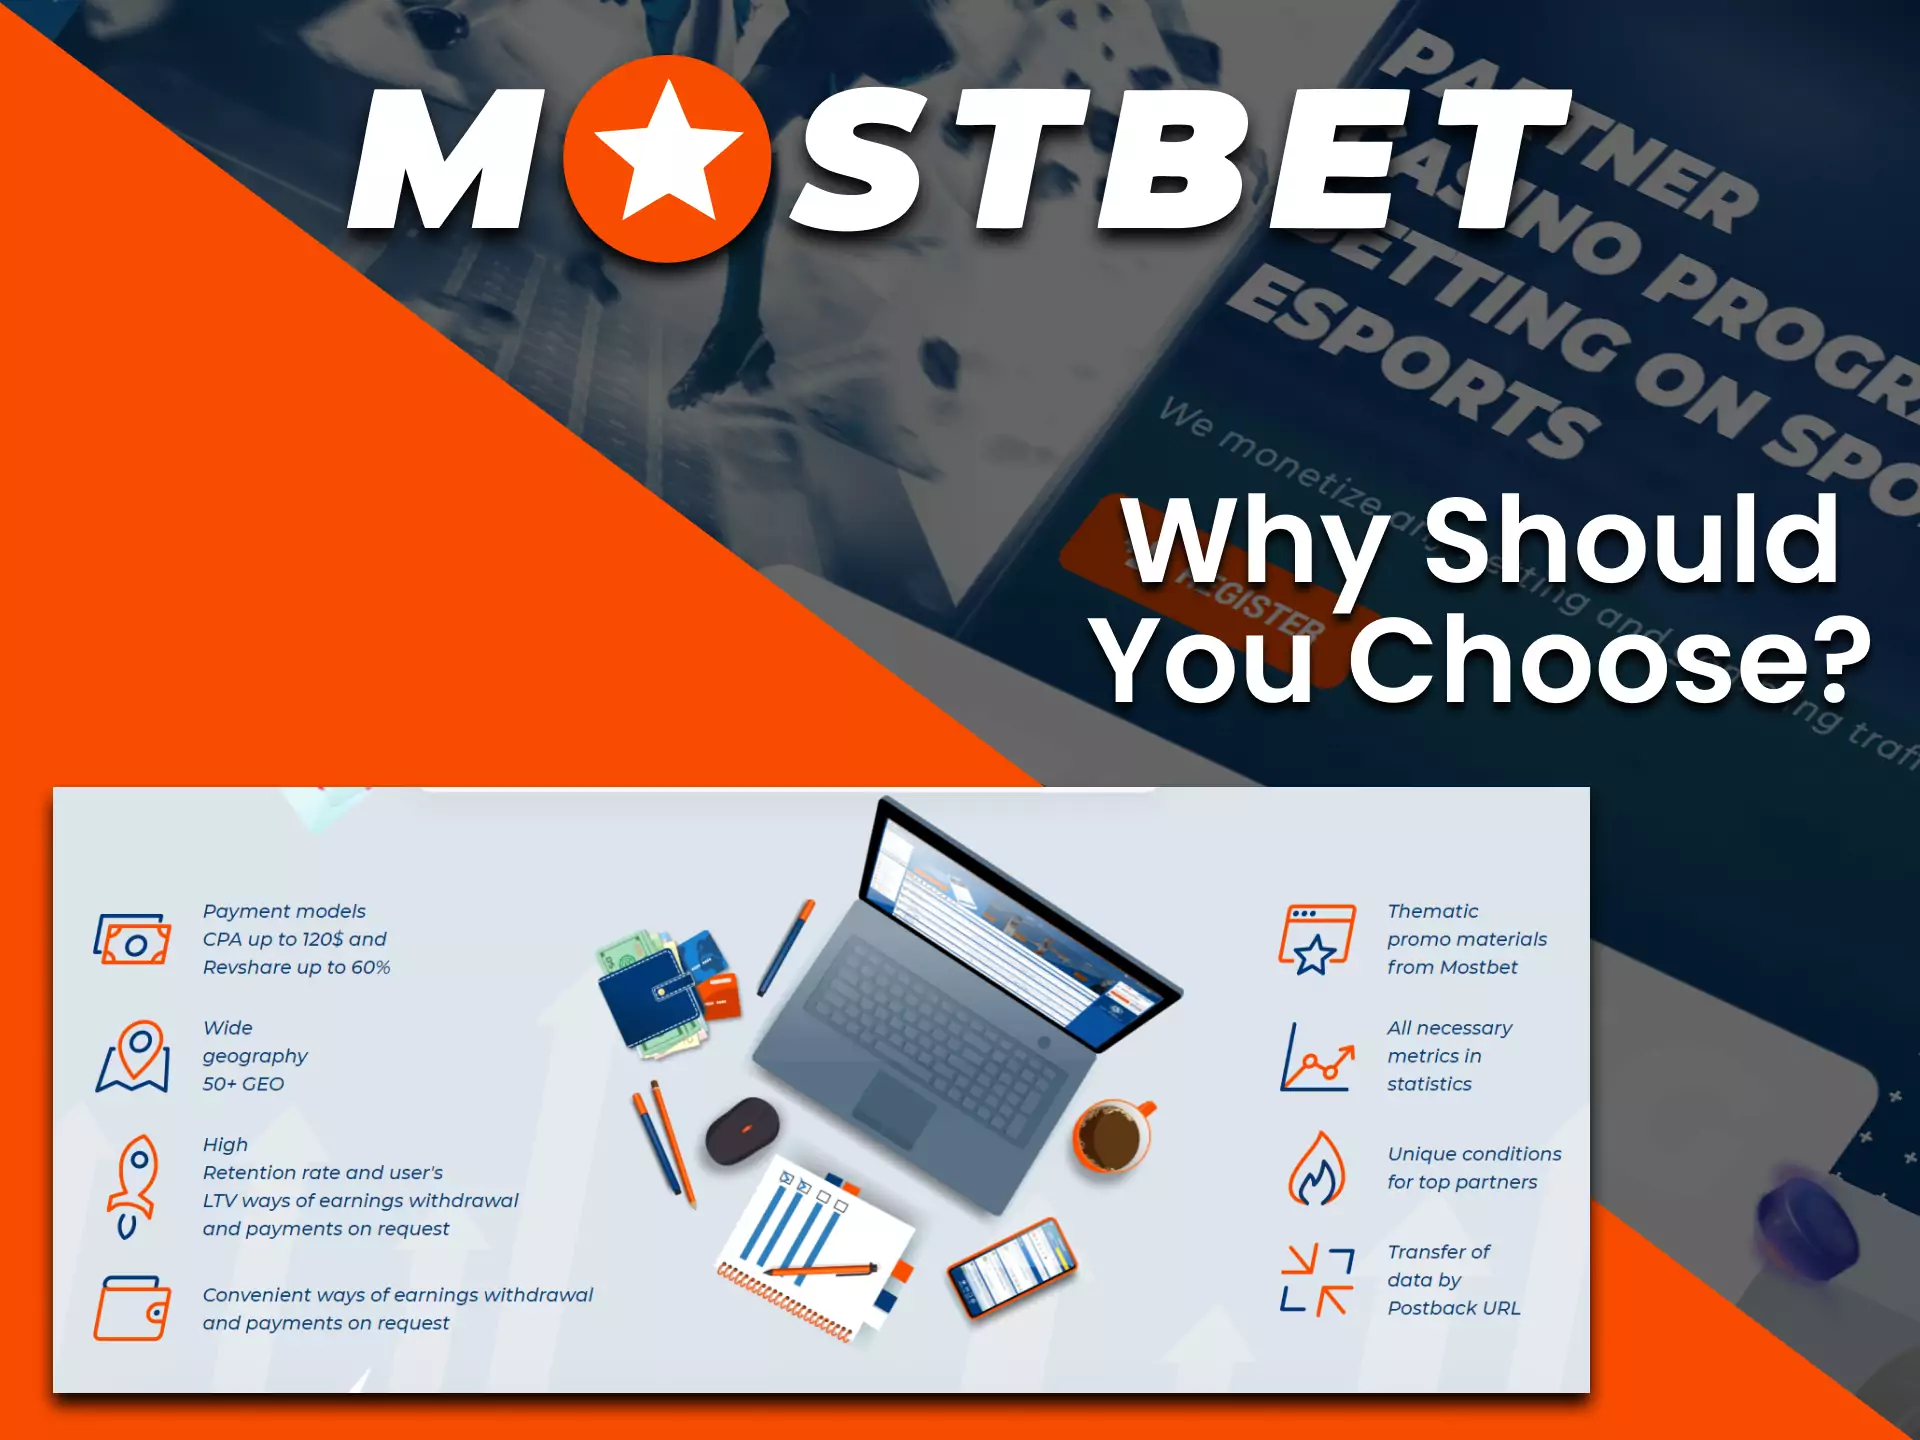 Mostbet has a number of benefits.